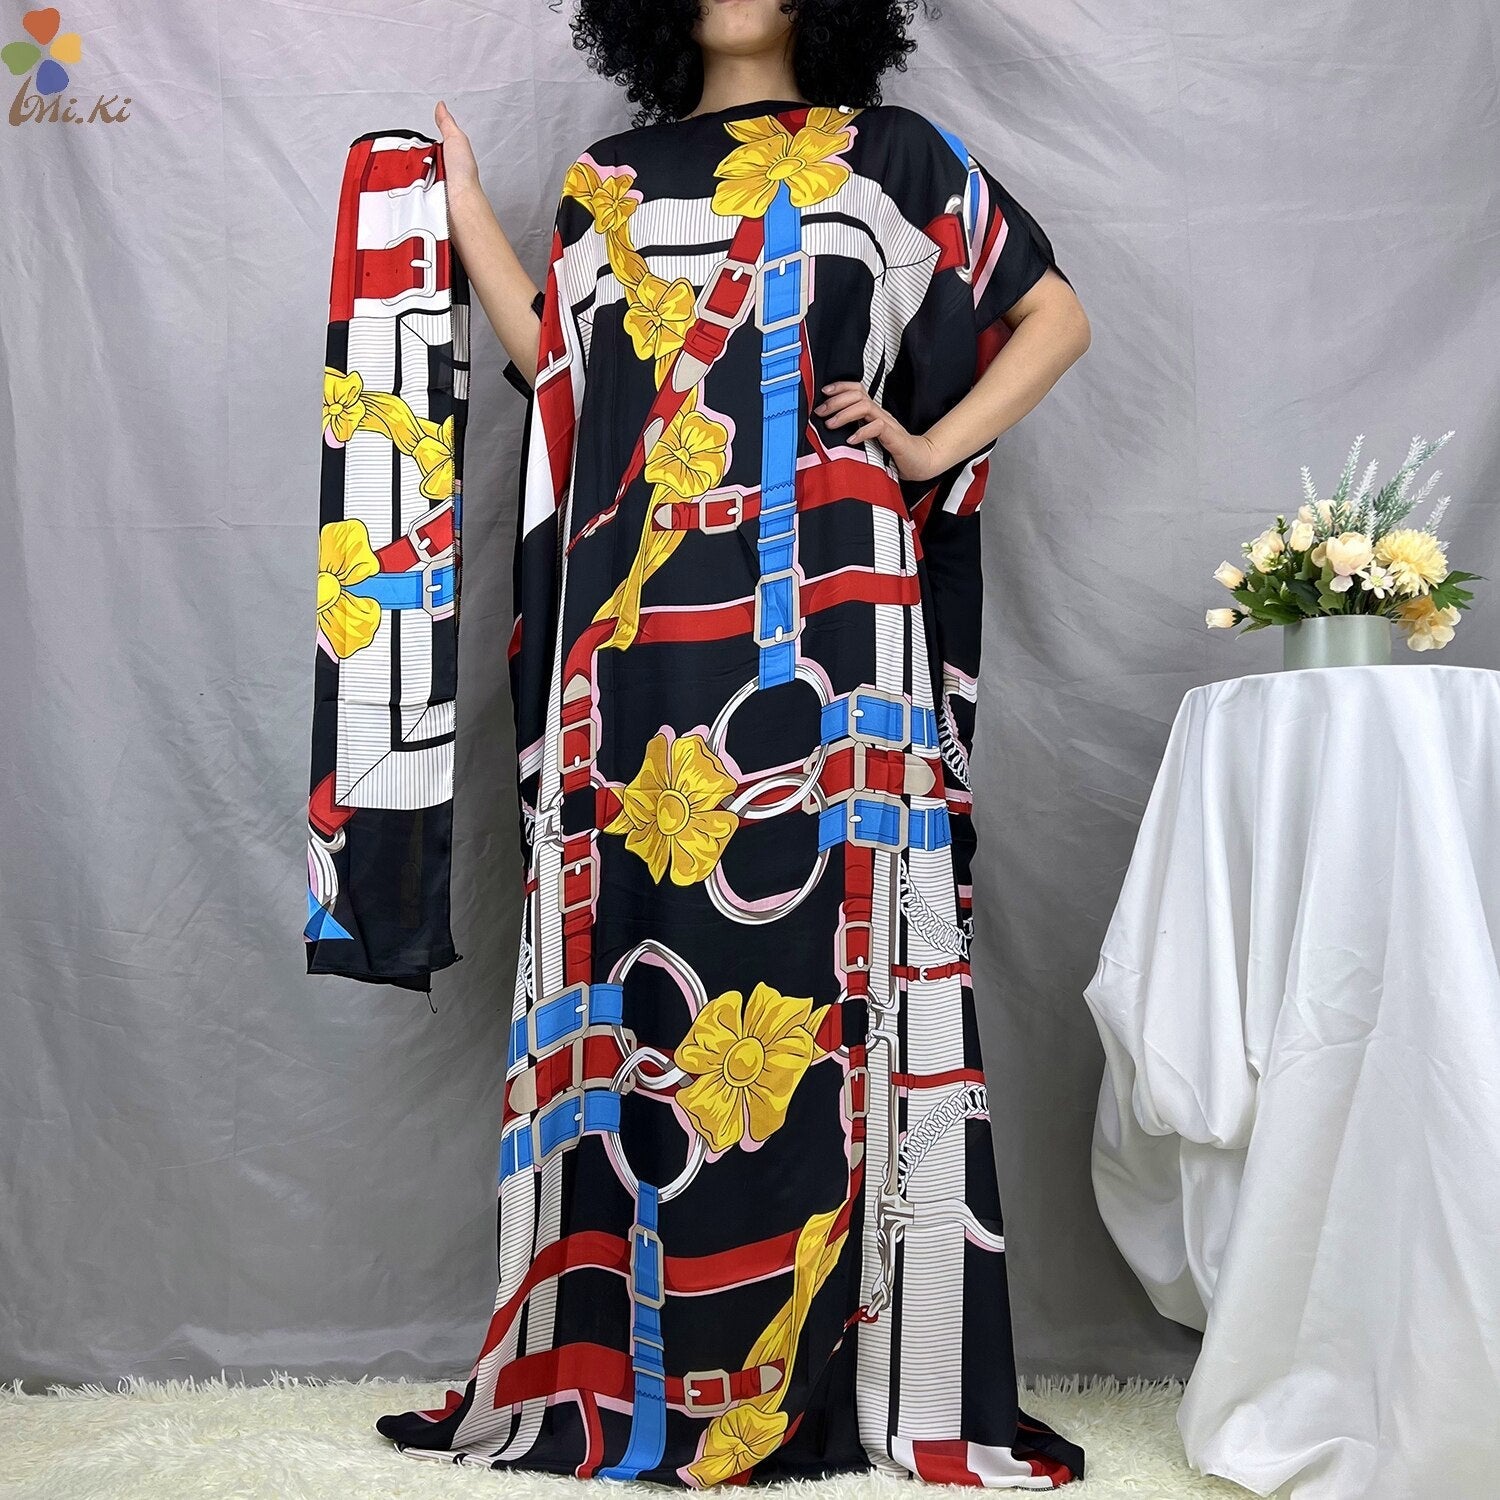 2PC Set of Fashionable Dashiki Robes - Printed Loose Dresses with Luxurious Silk Fabric for Women - Flexi Africa - Flexi Africa offers Free Delivery Worldwide - Vibrant African traditional clothing showcasing bold prints and intricate designs